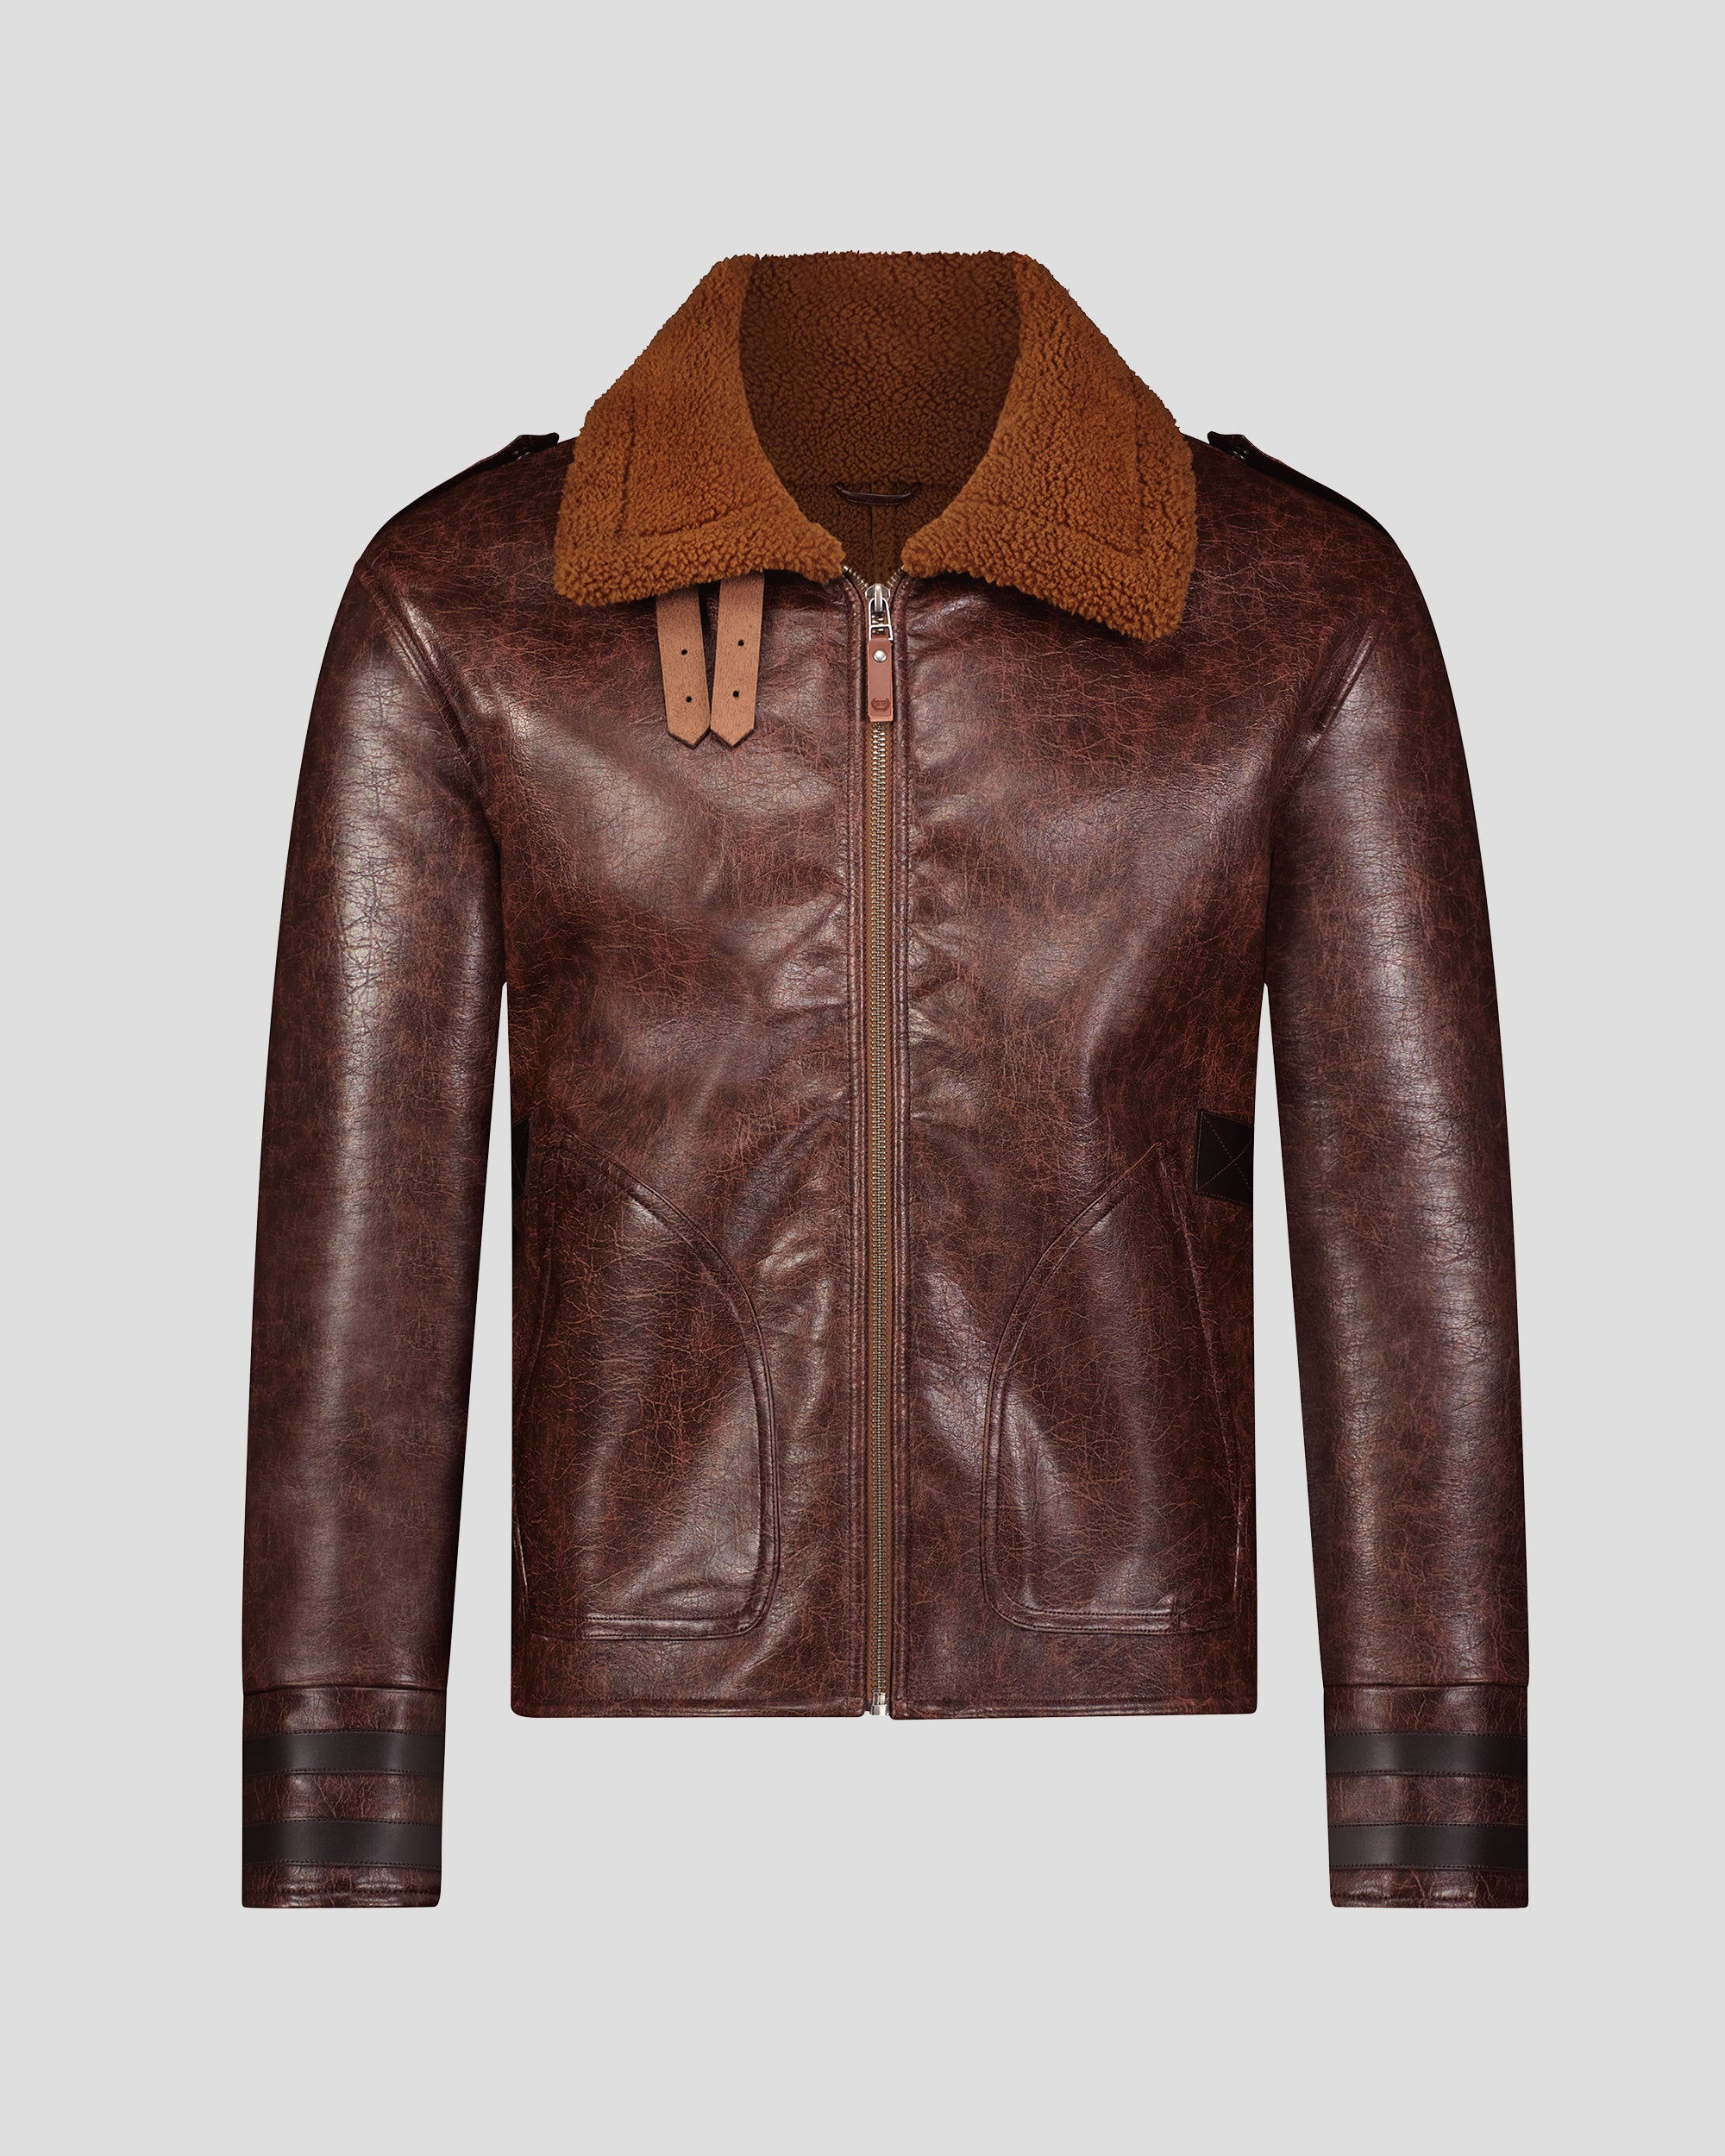 Buy Pare Genuine Leather Brown Jacket for Men's (Size : M,Color : Brown) at  Amazon.in